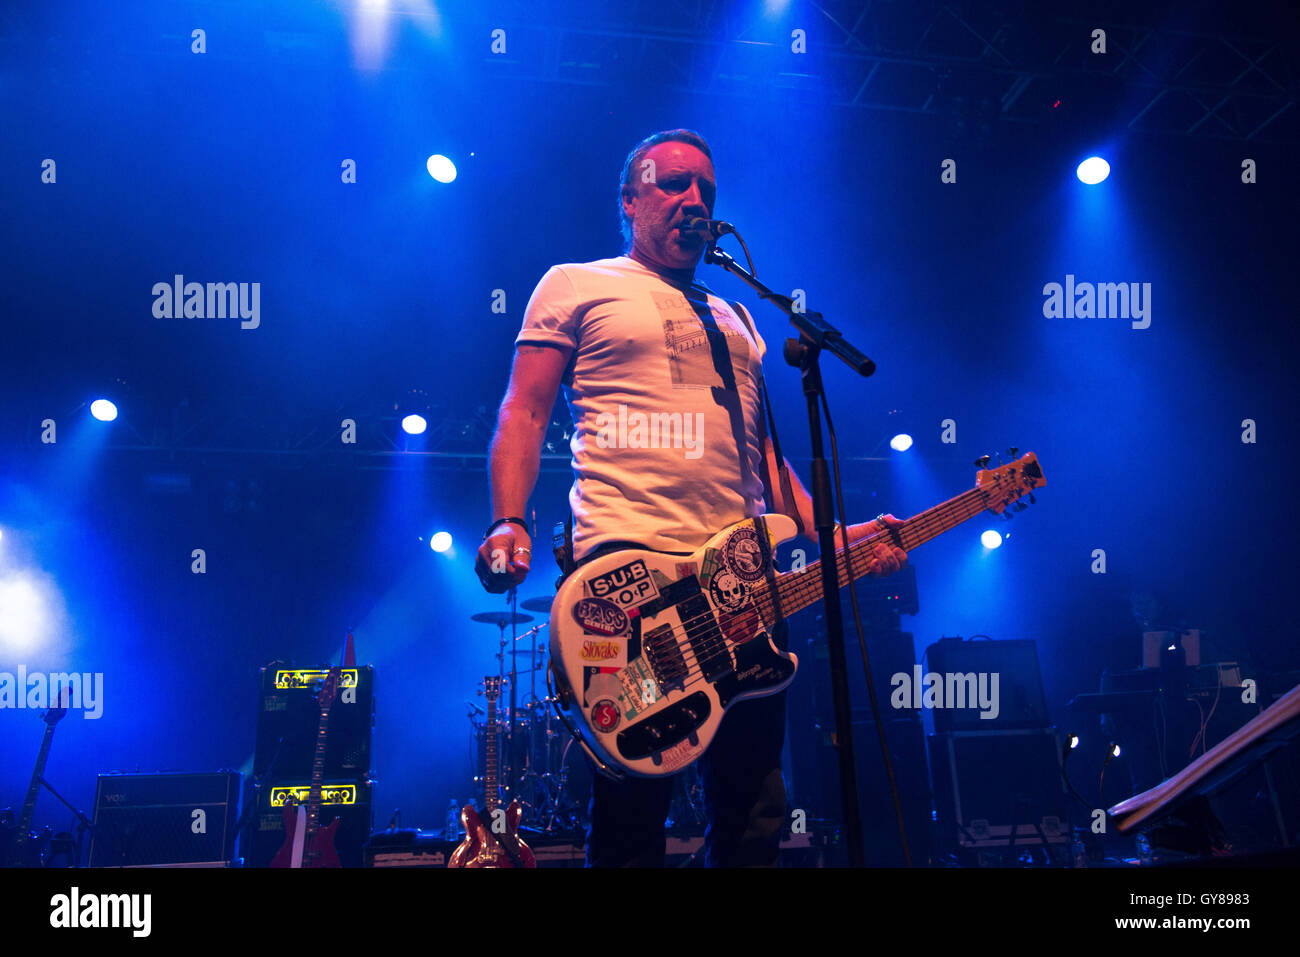 London, UK.17th Sept, 2016. Peter Hook and The Light perform at London's O2  Forum Kentish Town. Substance tour is composed by songs of New Order and  Joy Division, in which Peter Hook